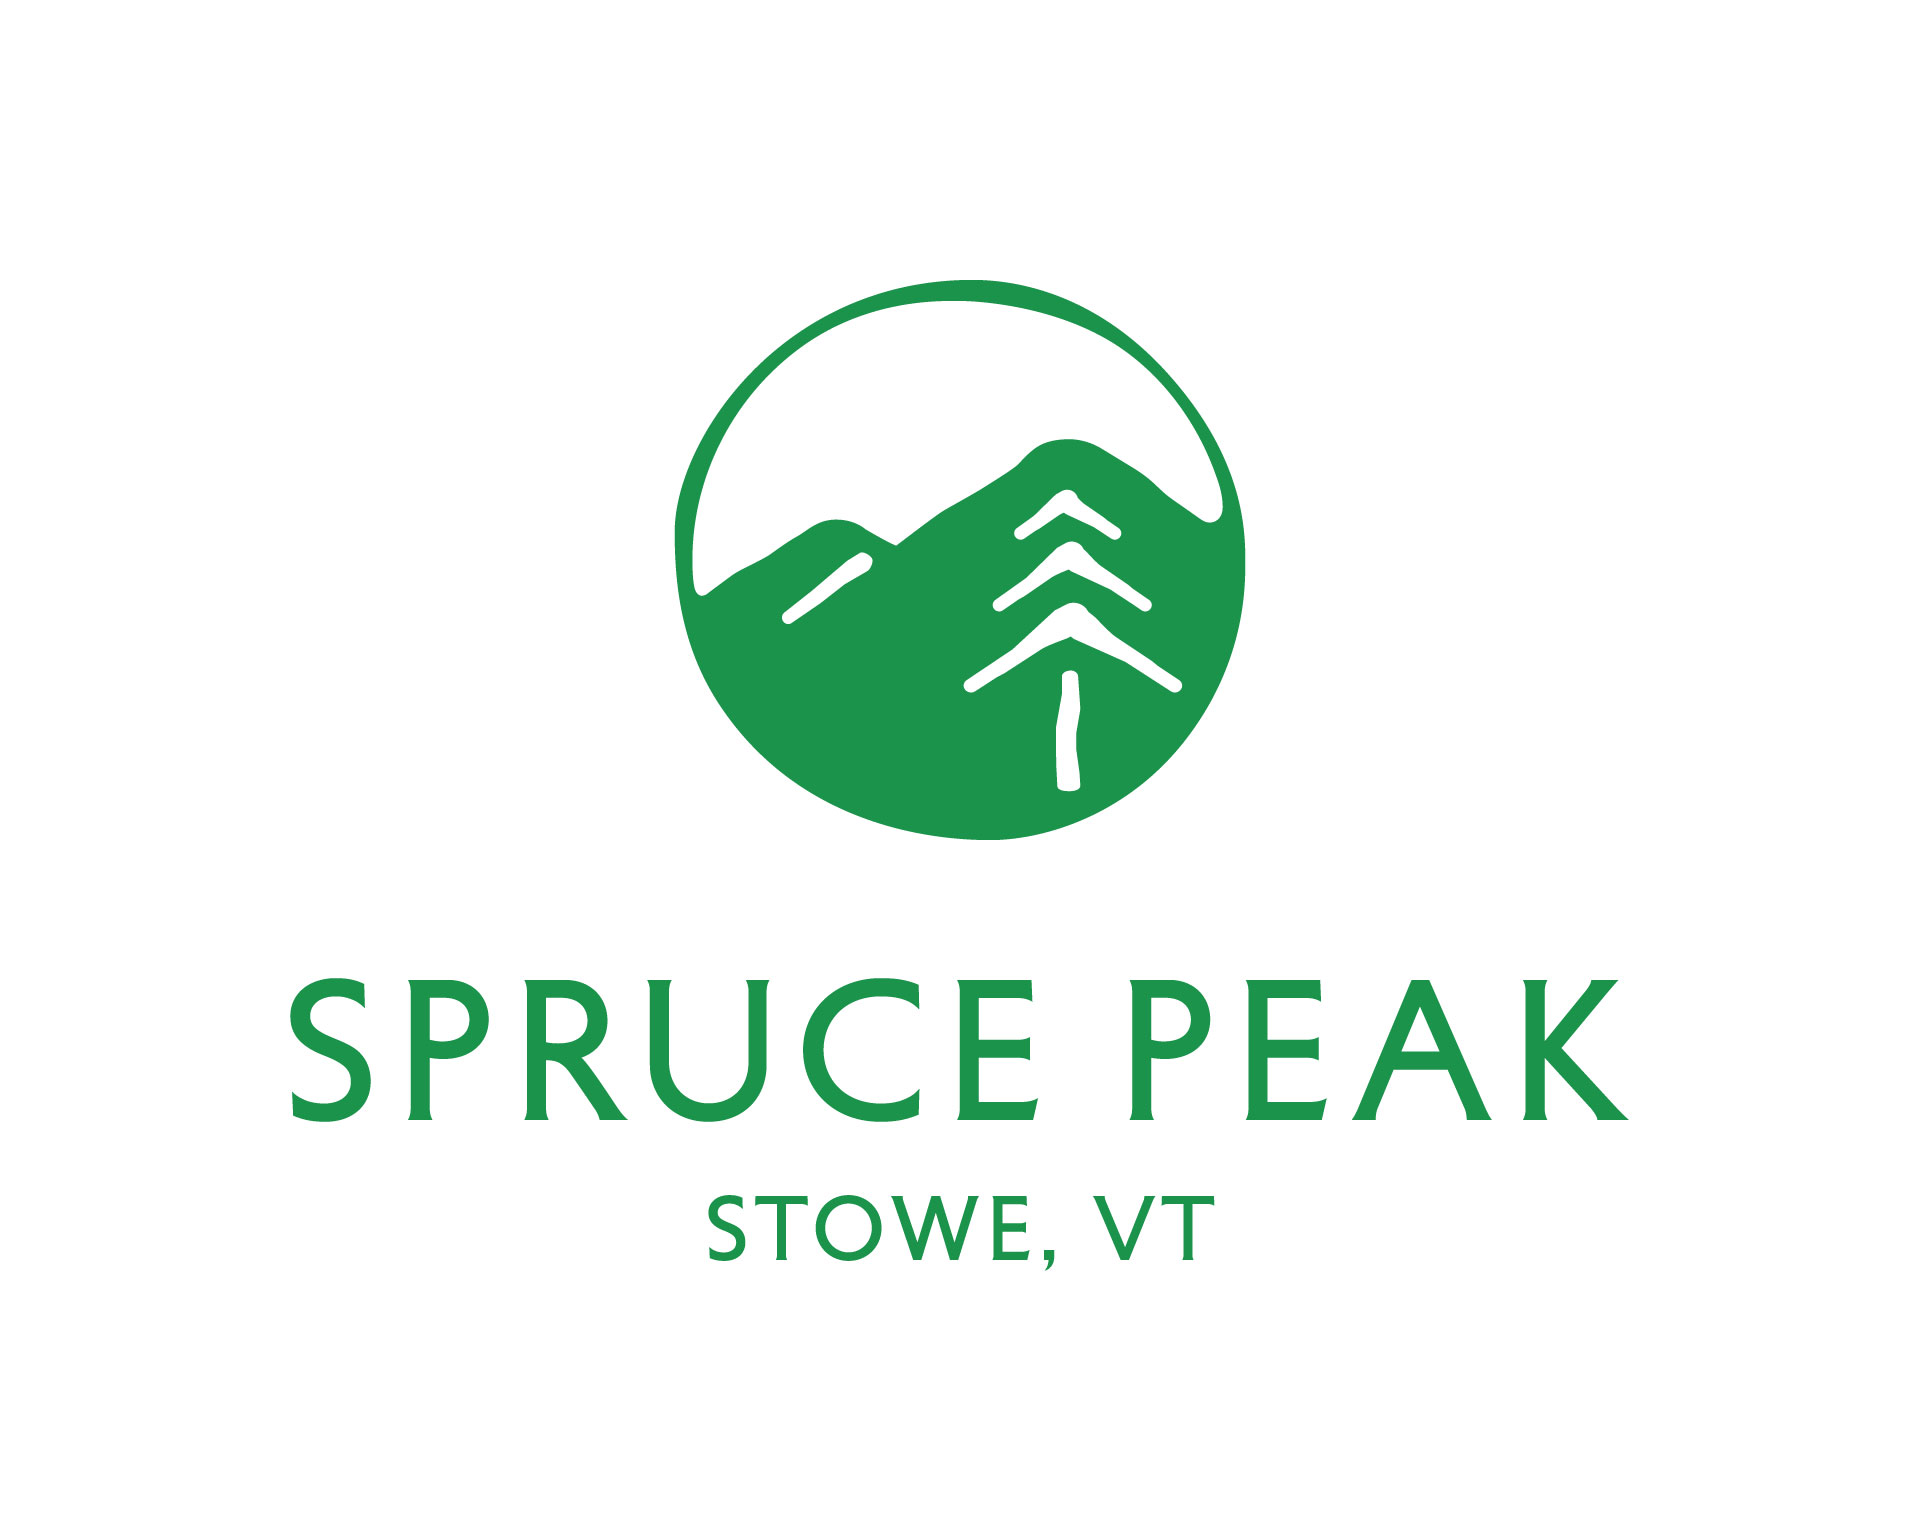 White background with green circle enclosing mountains and simpel pine tree figure with words SprucePeakStowe, Vermont